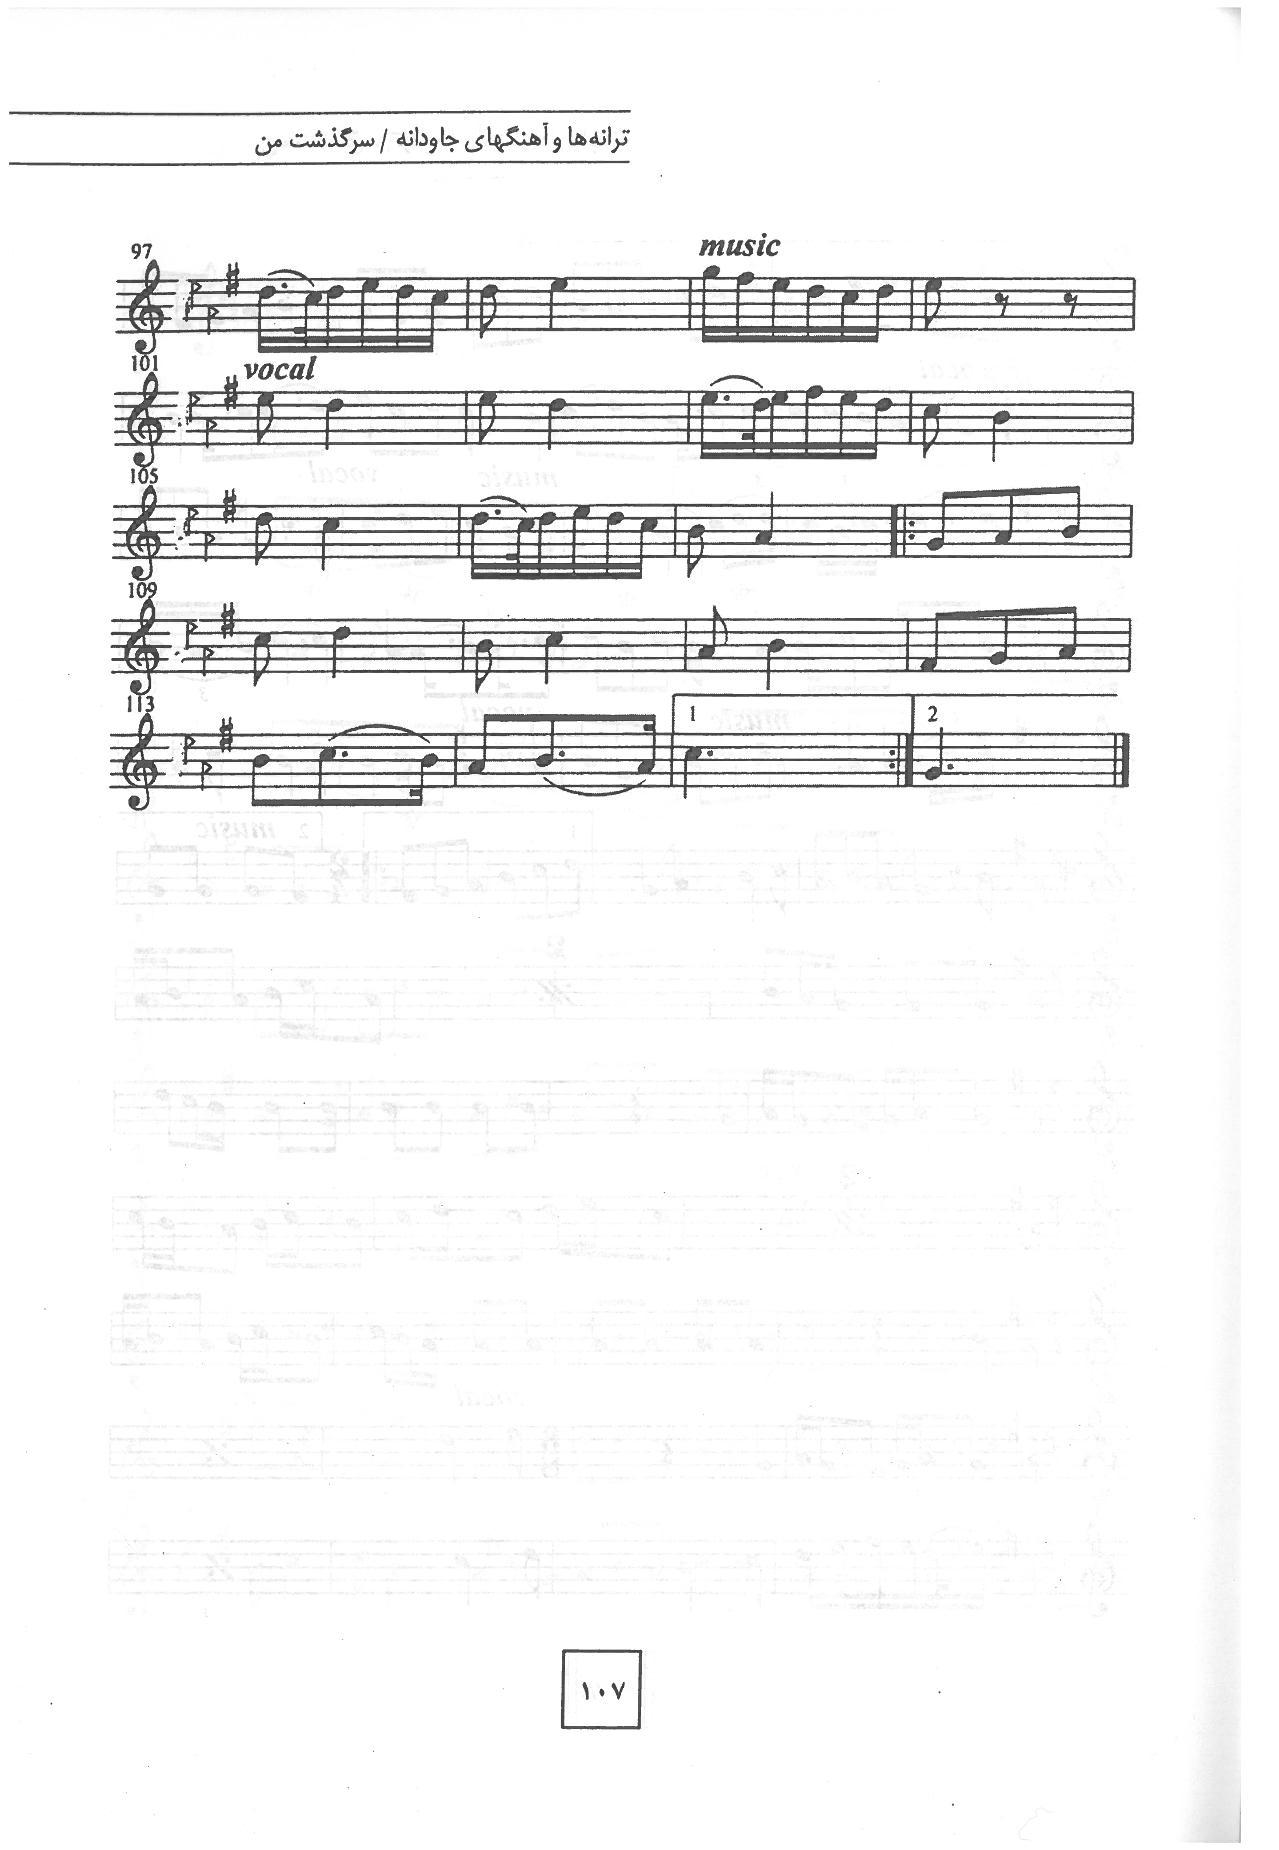 A sheet music page with some notes and lines.